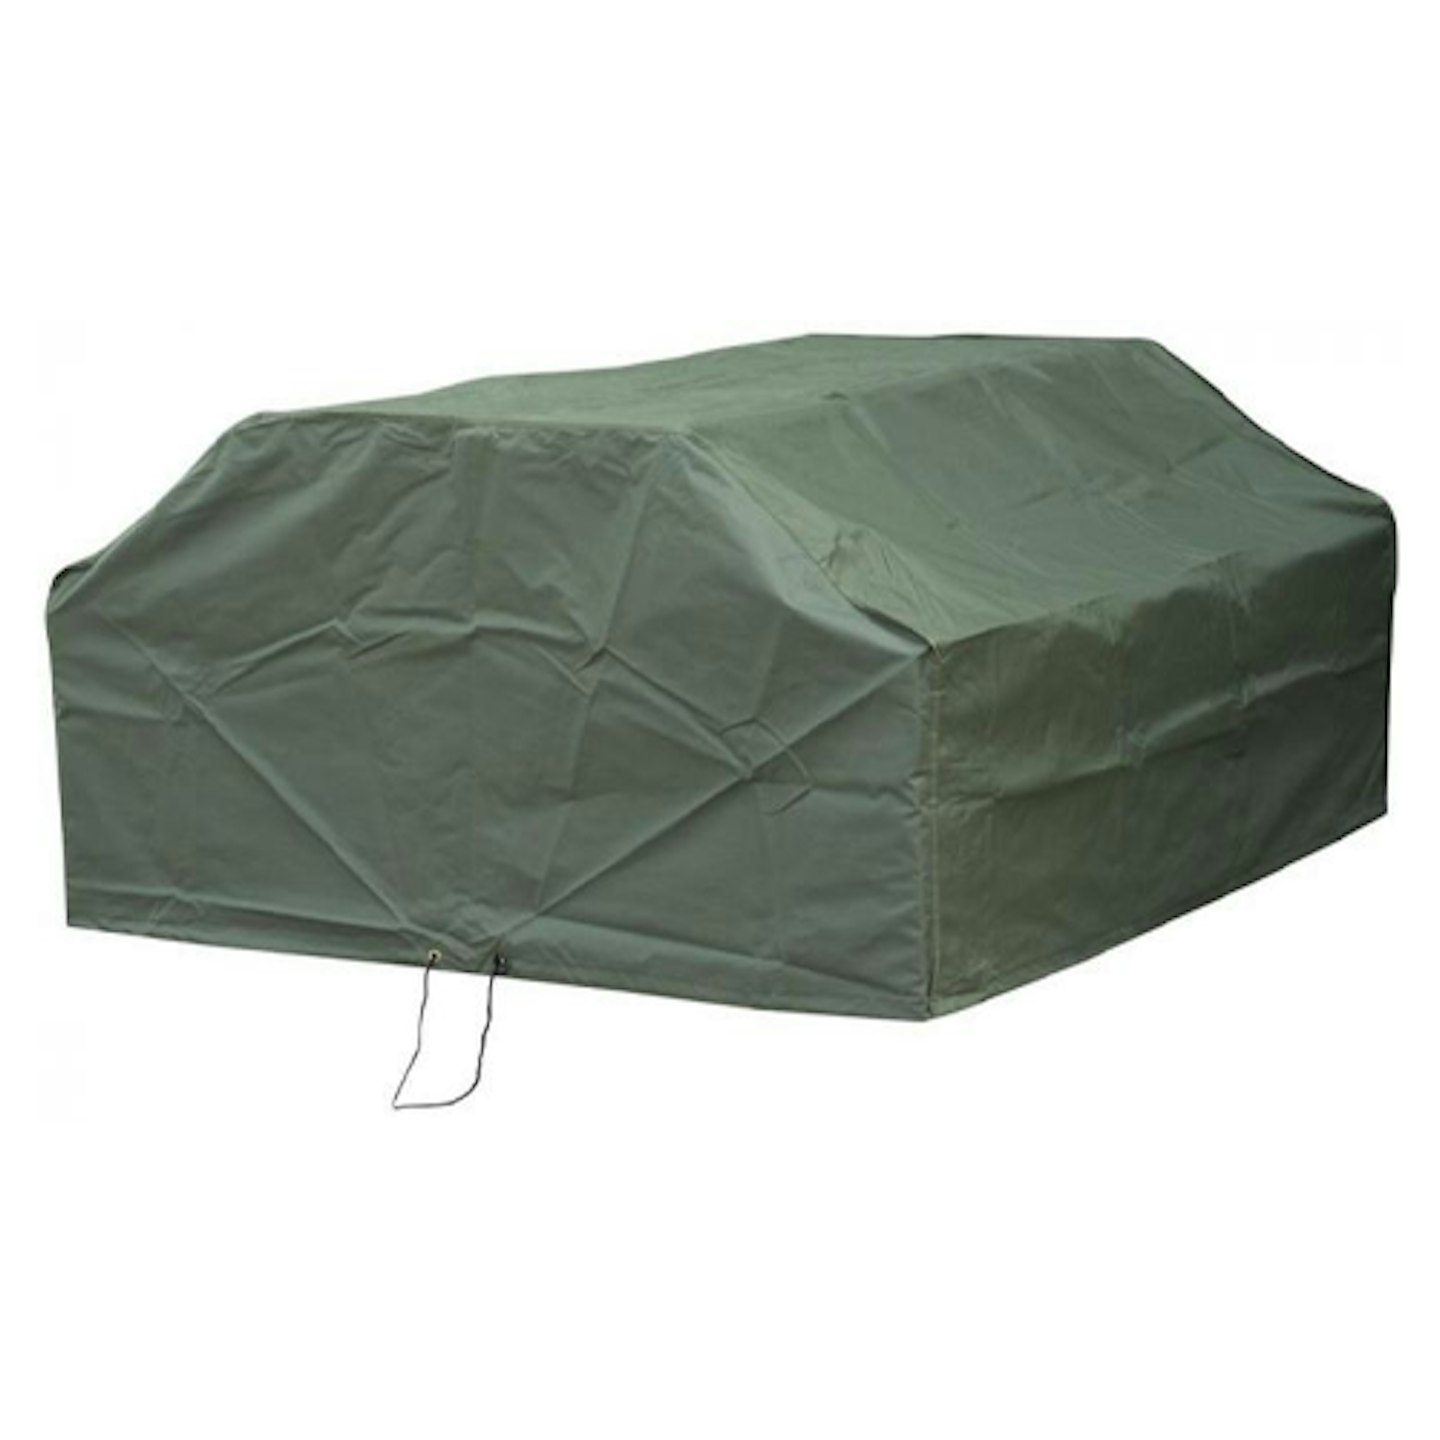 Picnic Table Cover